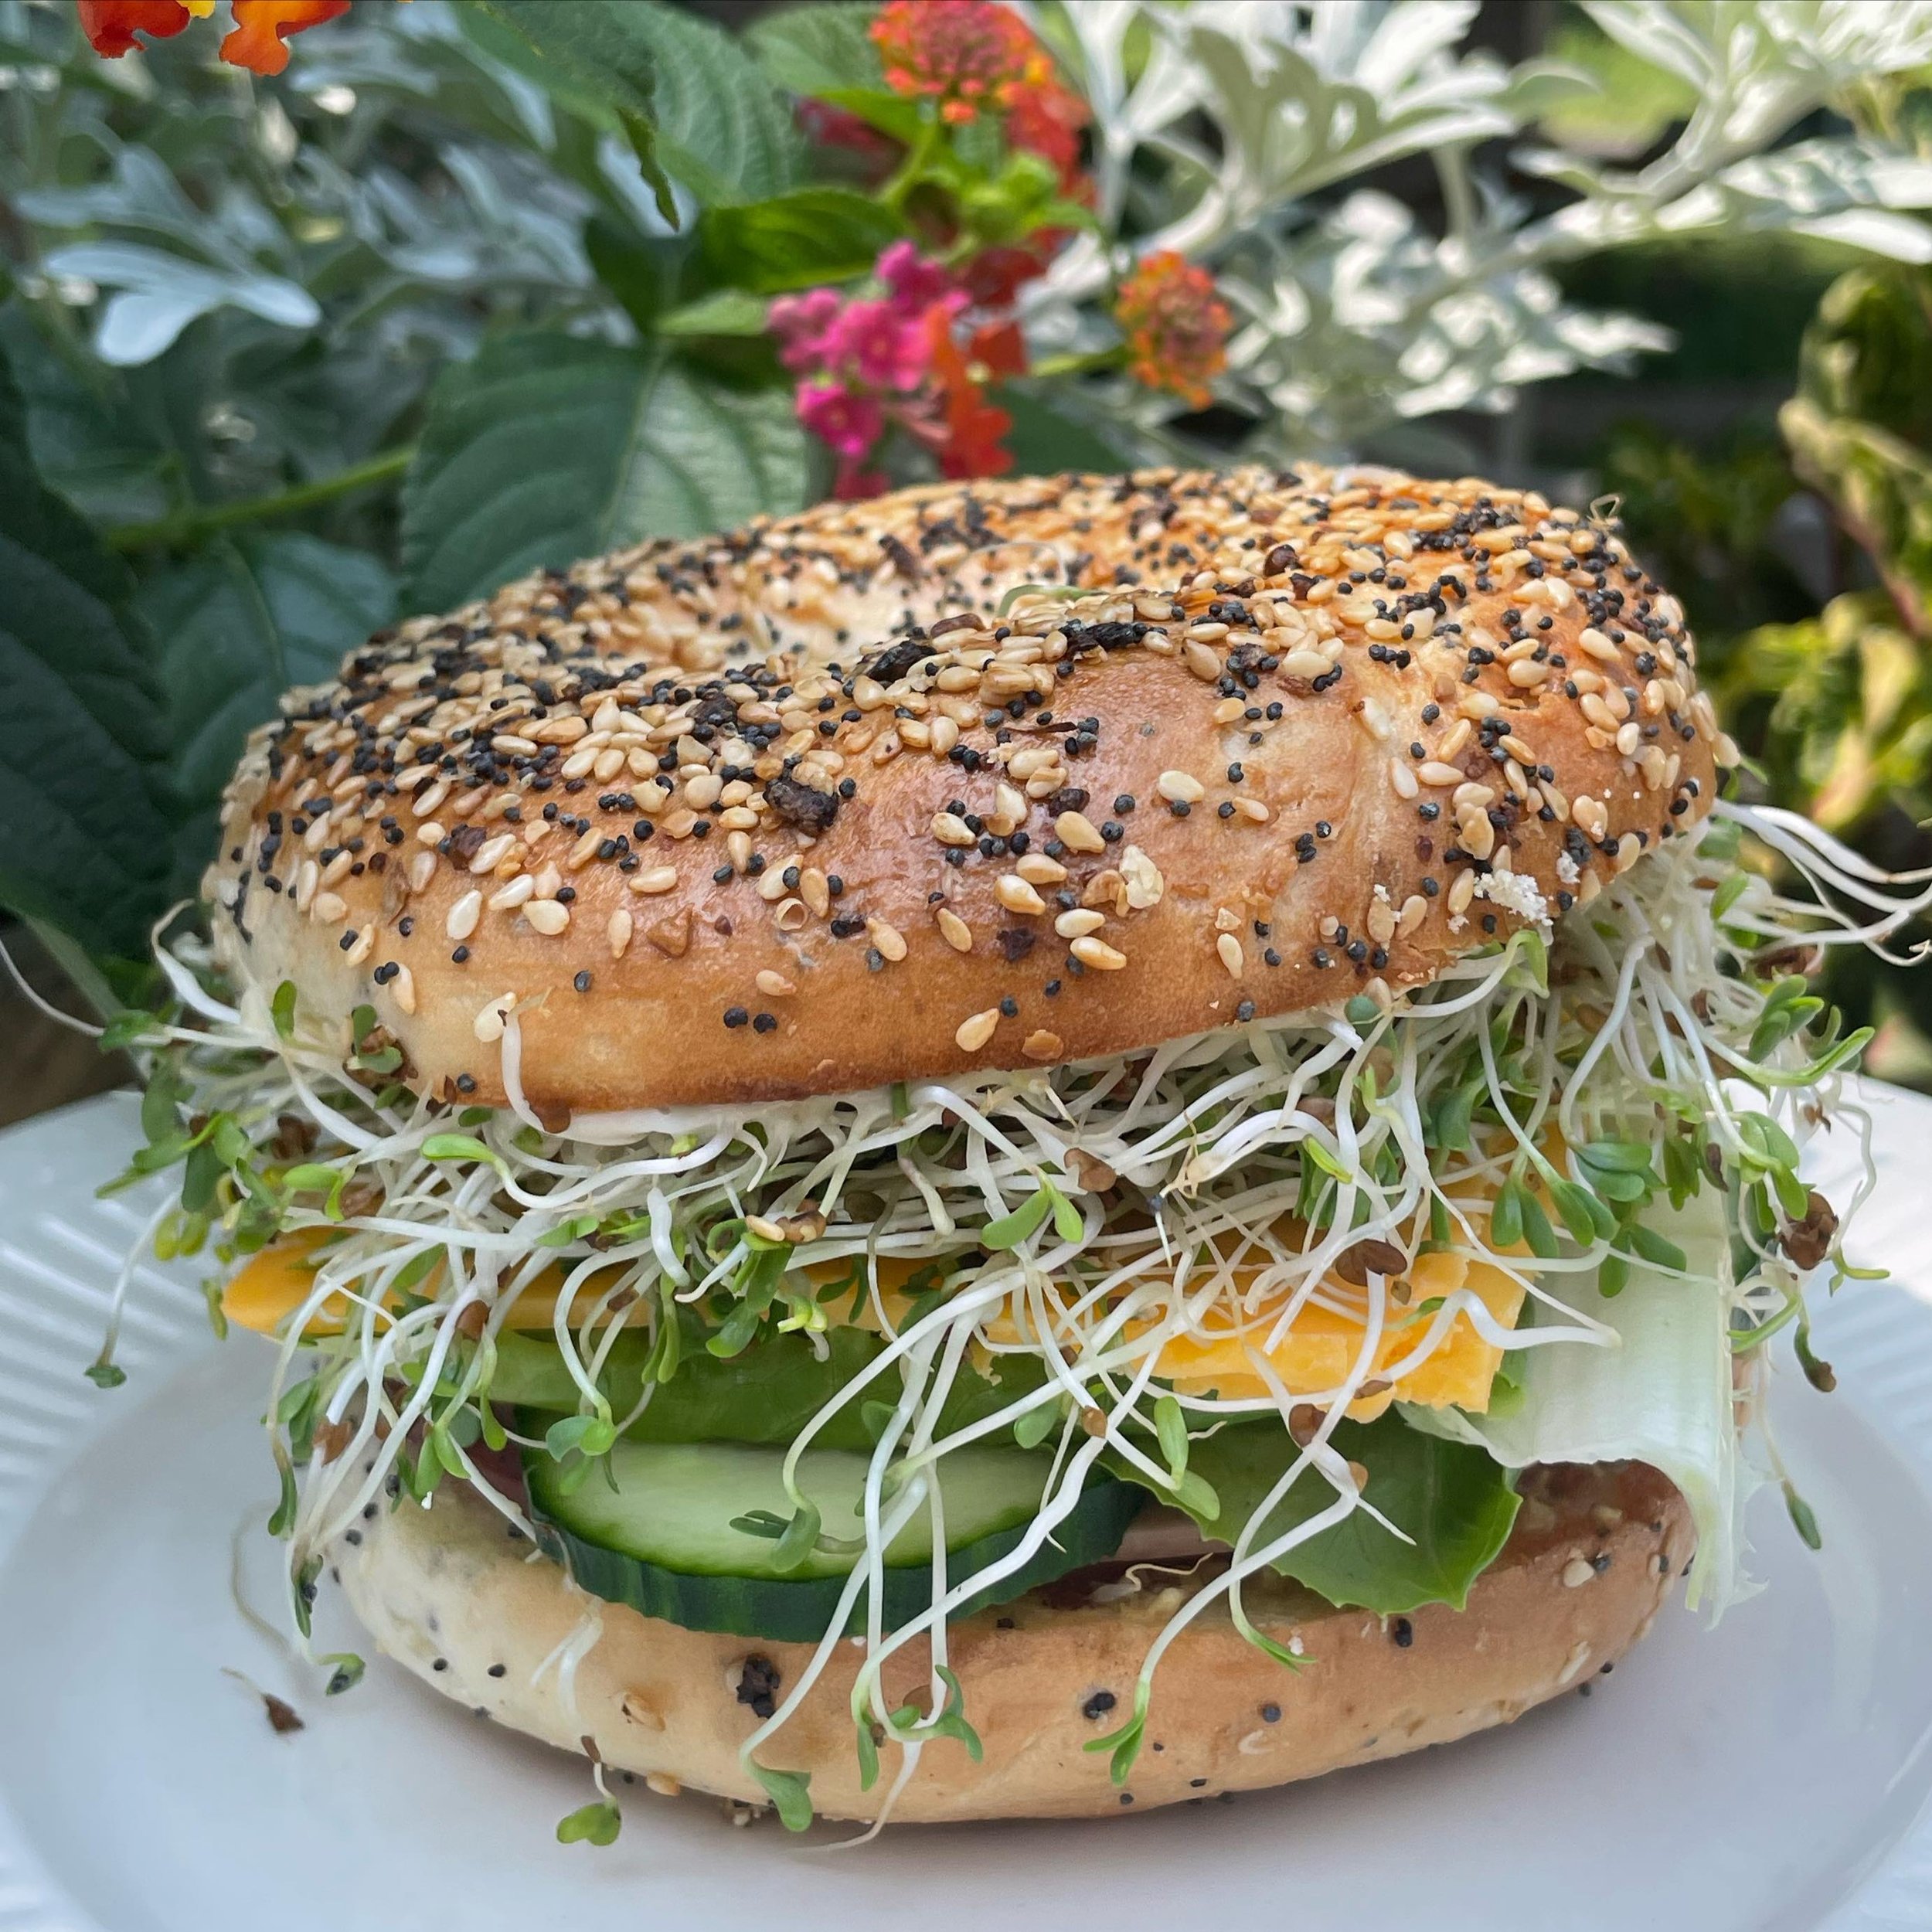 Hot days and savoury bagels&hellip; doesn&rsquo;t get much better than this! 😍

#sproutbagel #sprouts #organicsprouts #organic #organicmicrogreens #sproutclub #sproutlife #healthyeating #deliciousfood #healthyfood #homegrown #local #sprouting #foodg